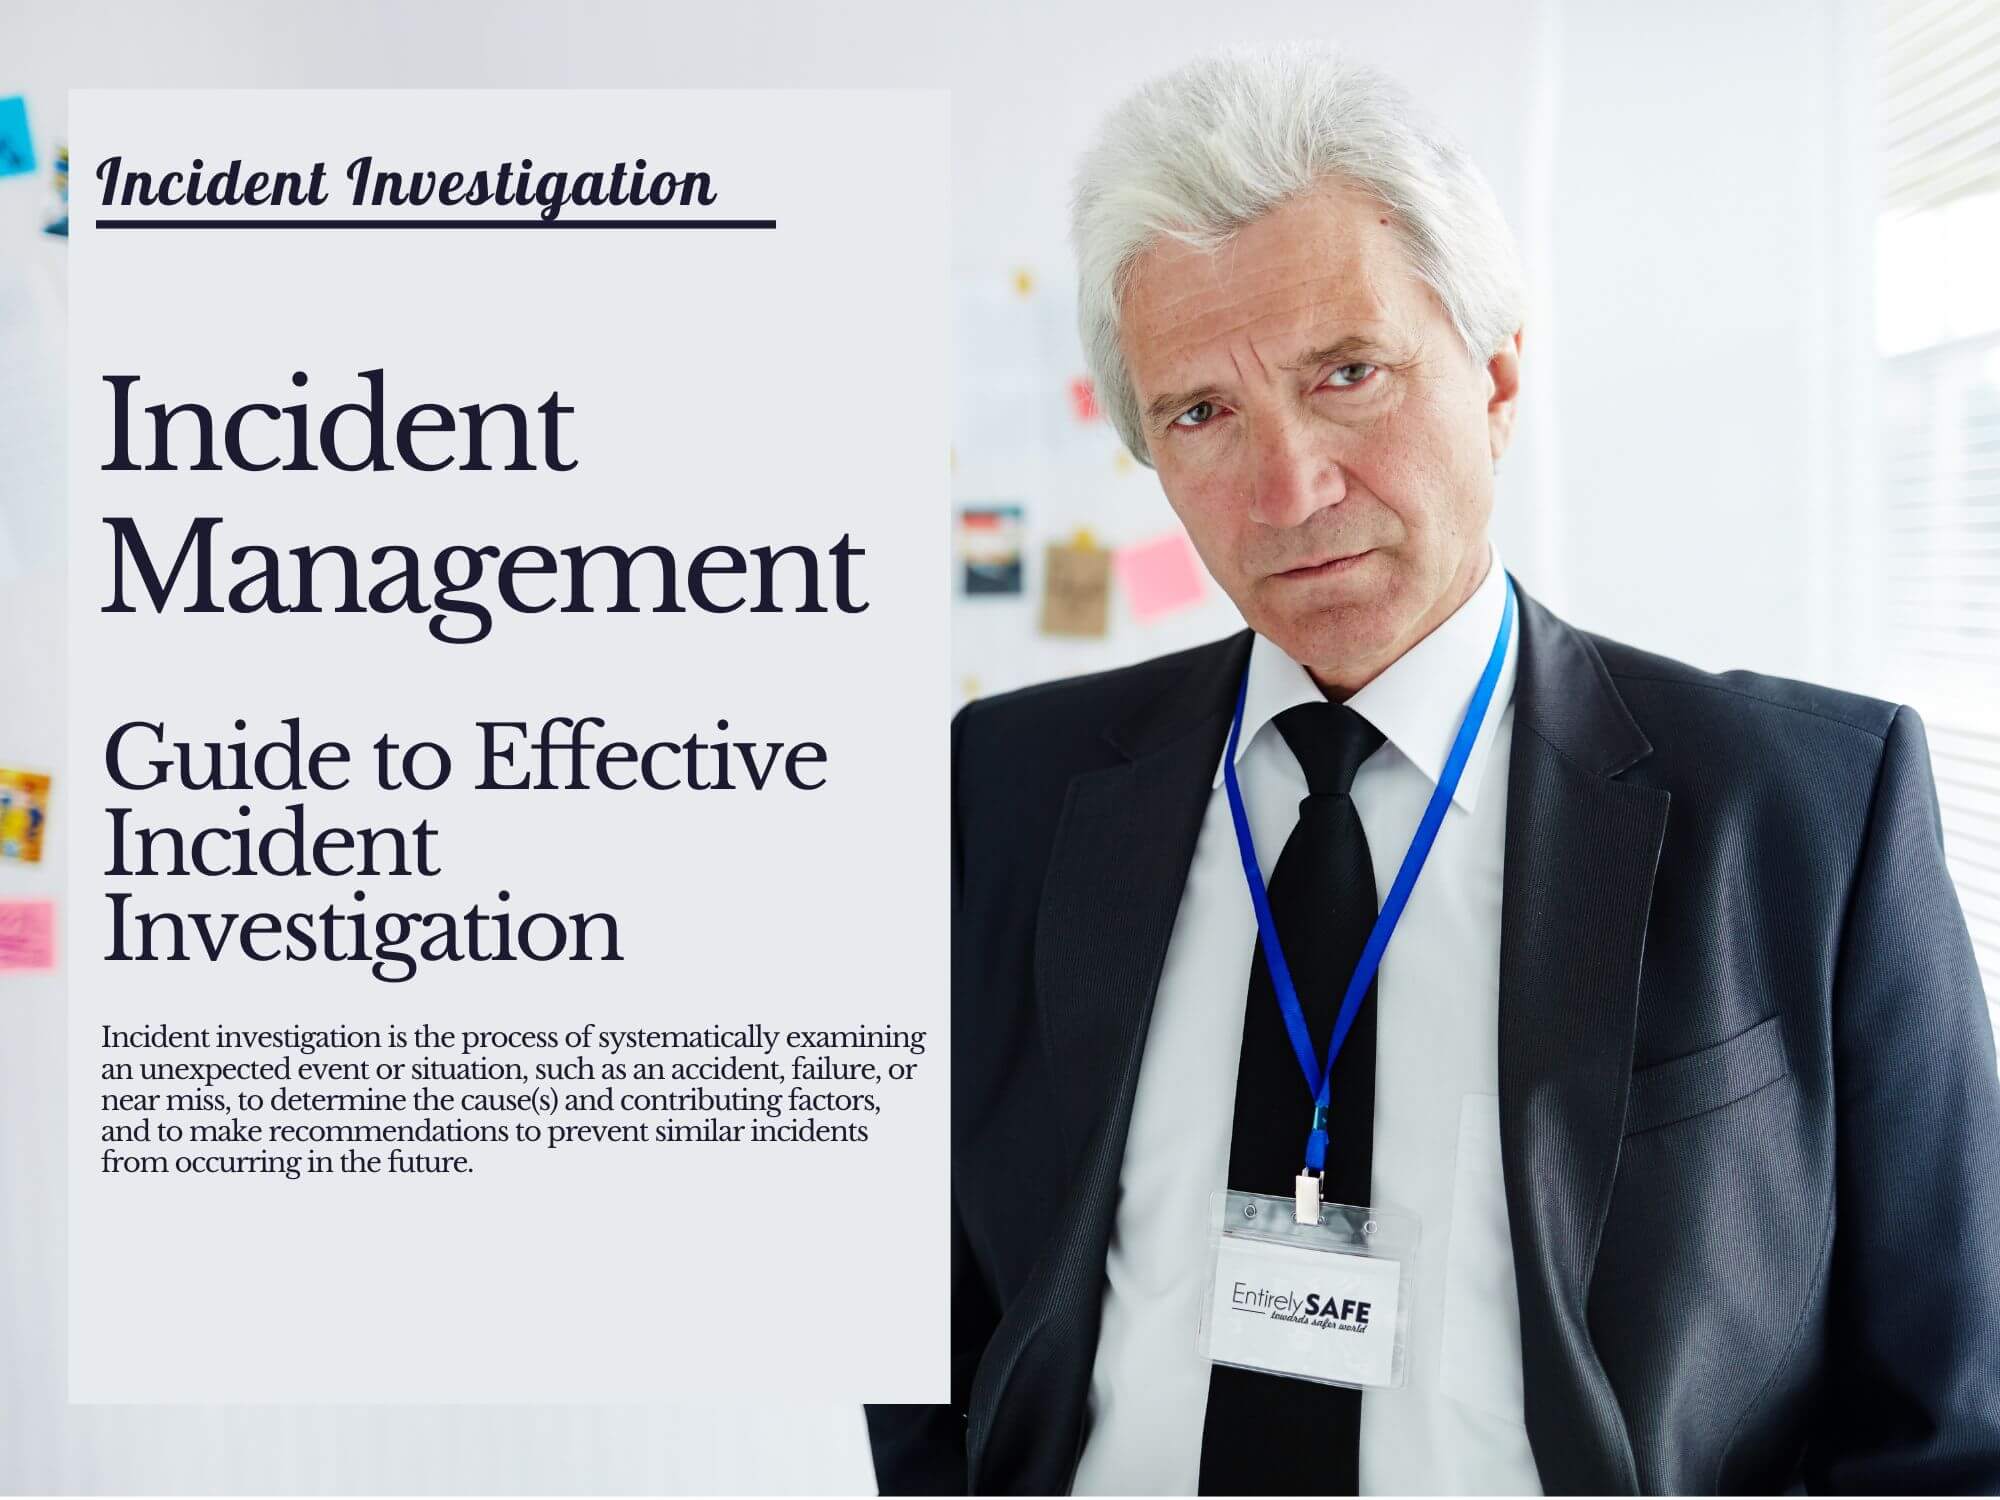 Incident Investigation Procedure - template for SAfety Professionals - SHE - HSE - OHS - 2